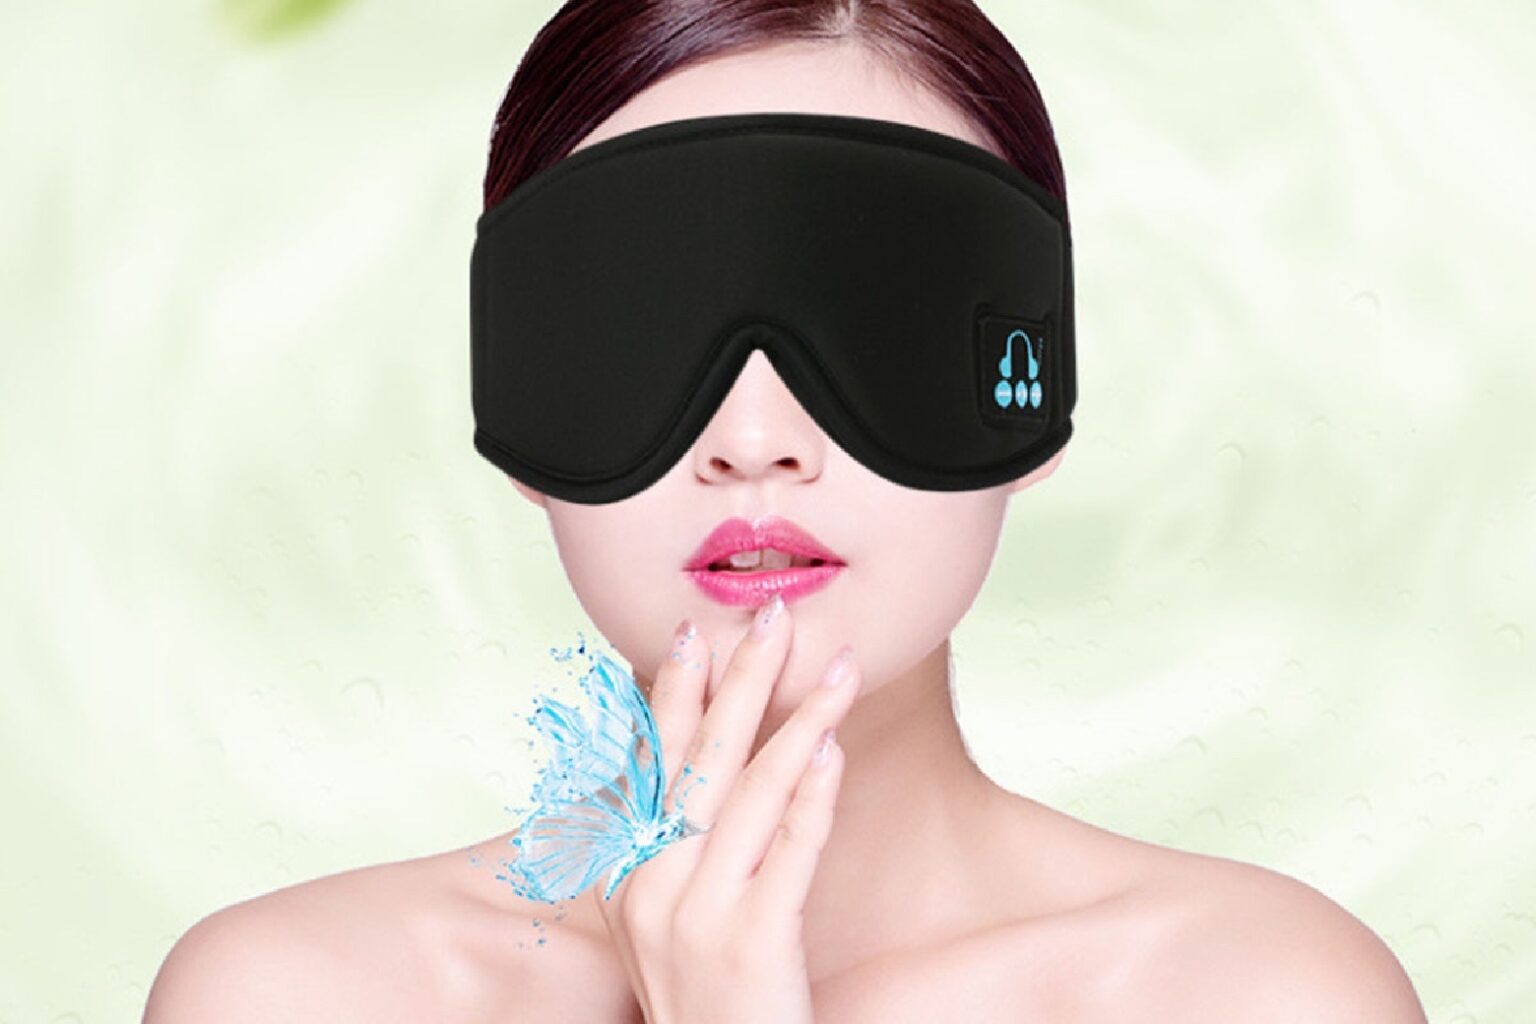 Gift idea! Treat someone to more sound sleep with this high-tech, Bluetooth-enabled sleep mask for only $20.